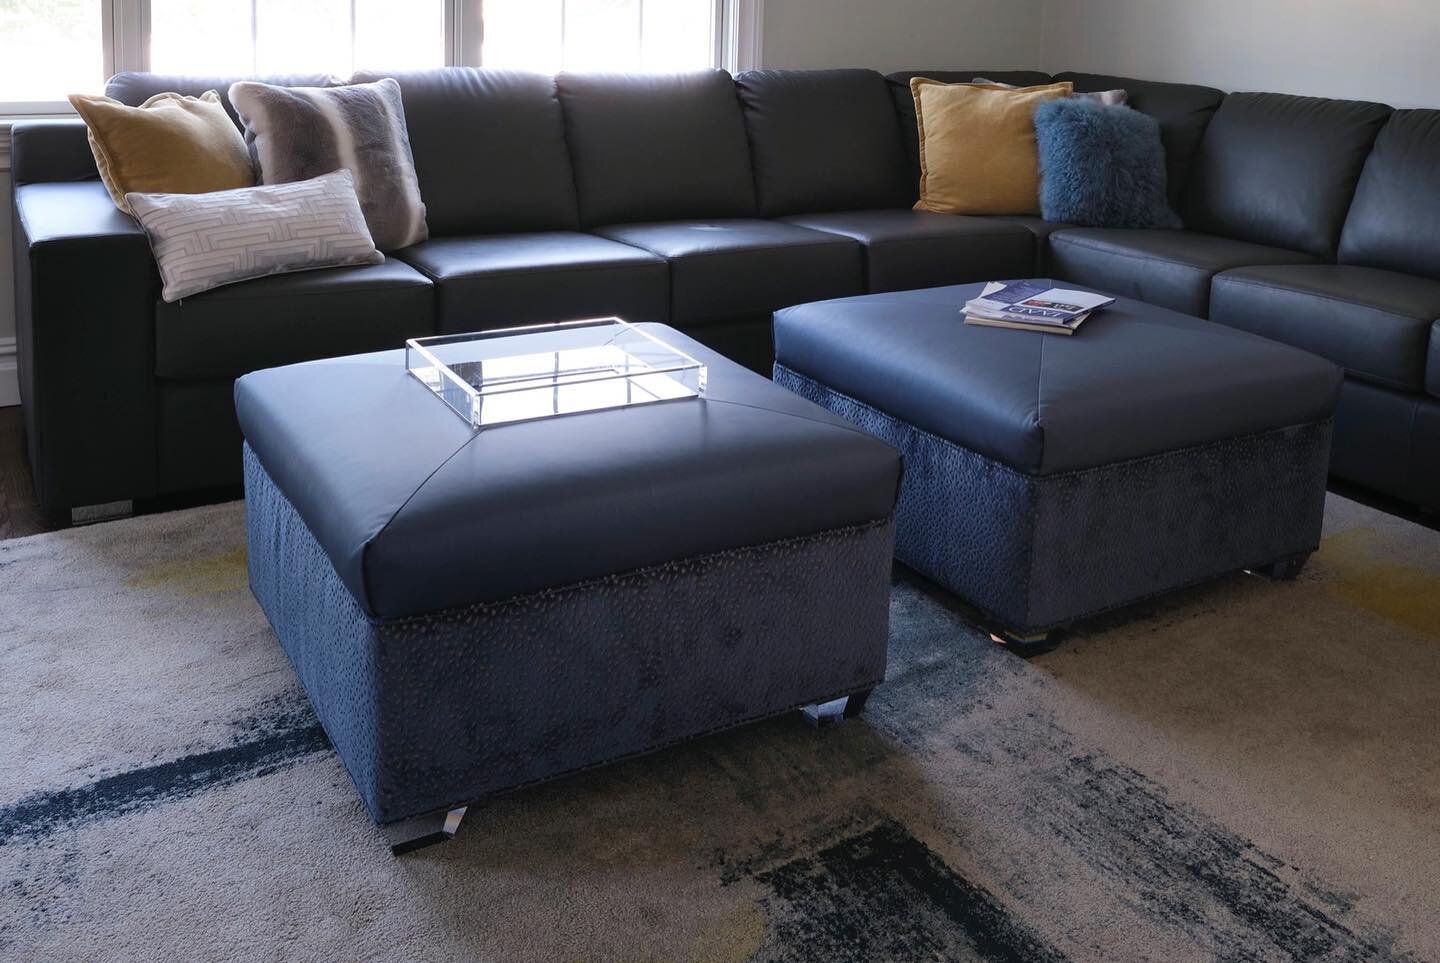 Beautiful den/family room! with custom built ins and ottomans. Swipe and spot the difference in picture #2 and #3! Photo by @aneyeforart 
&bull;
&bull;
&bull;
#den #familyroom #familyroomdesign #family #familytime #custom #builtins #ottoman #blue #na